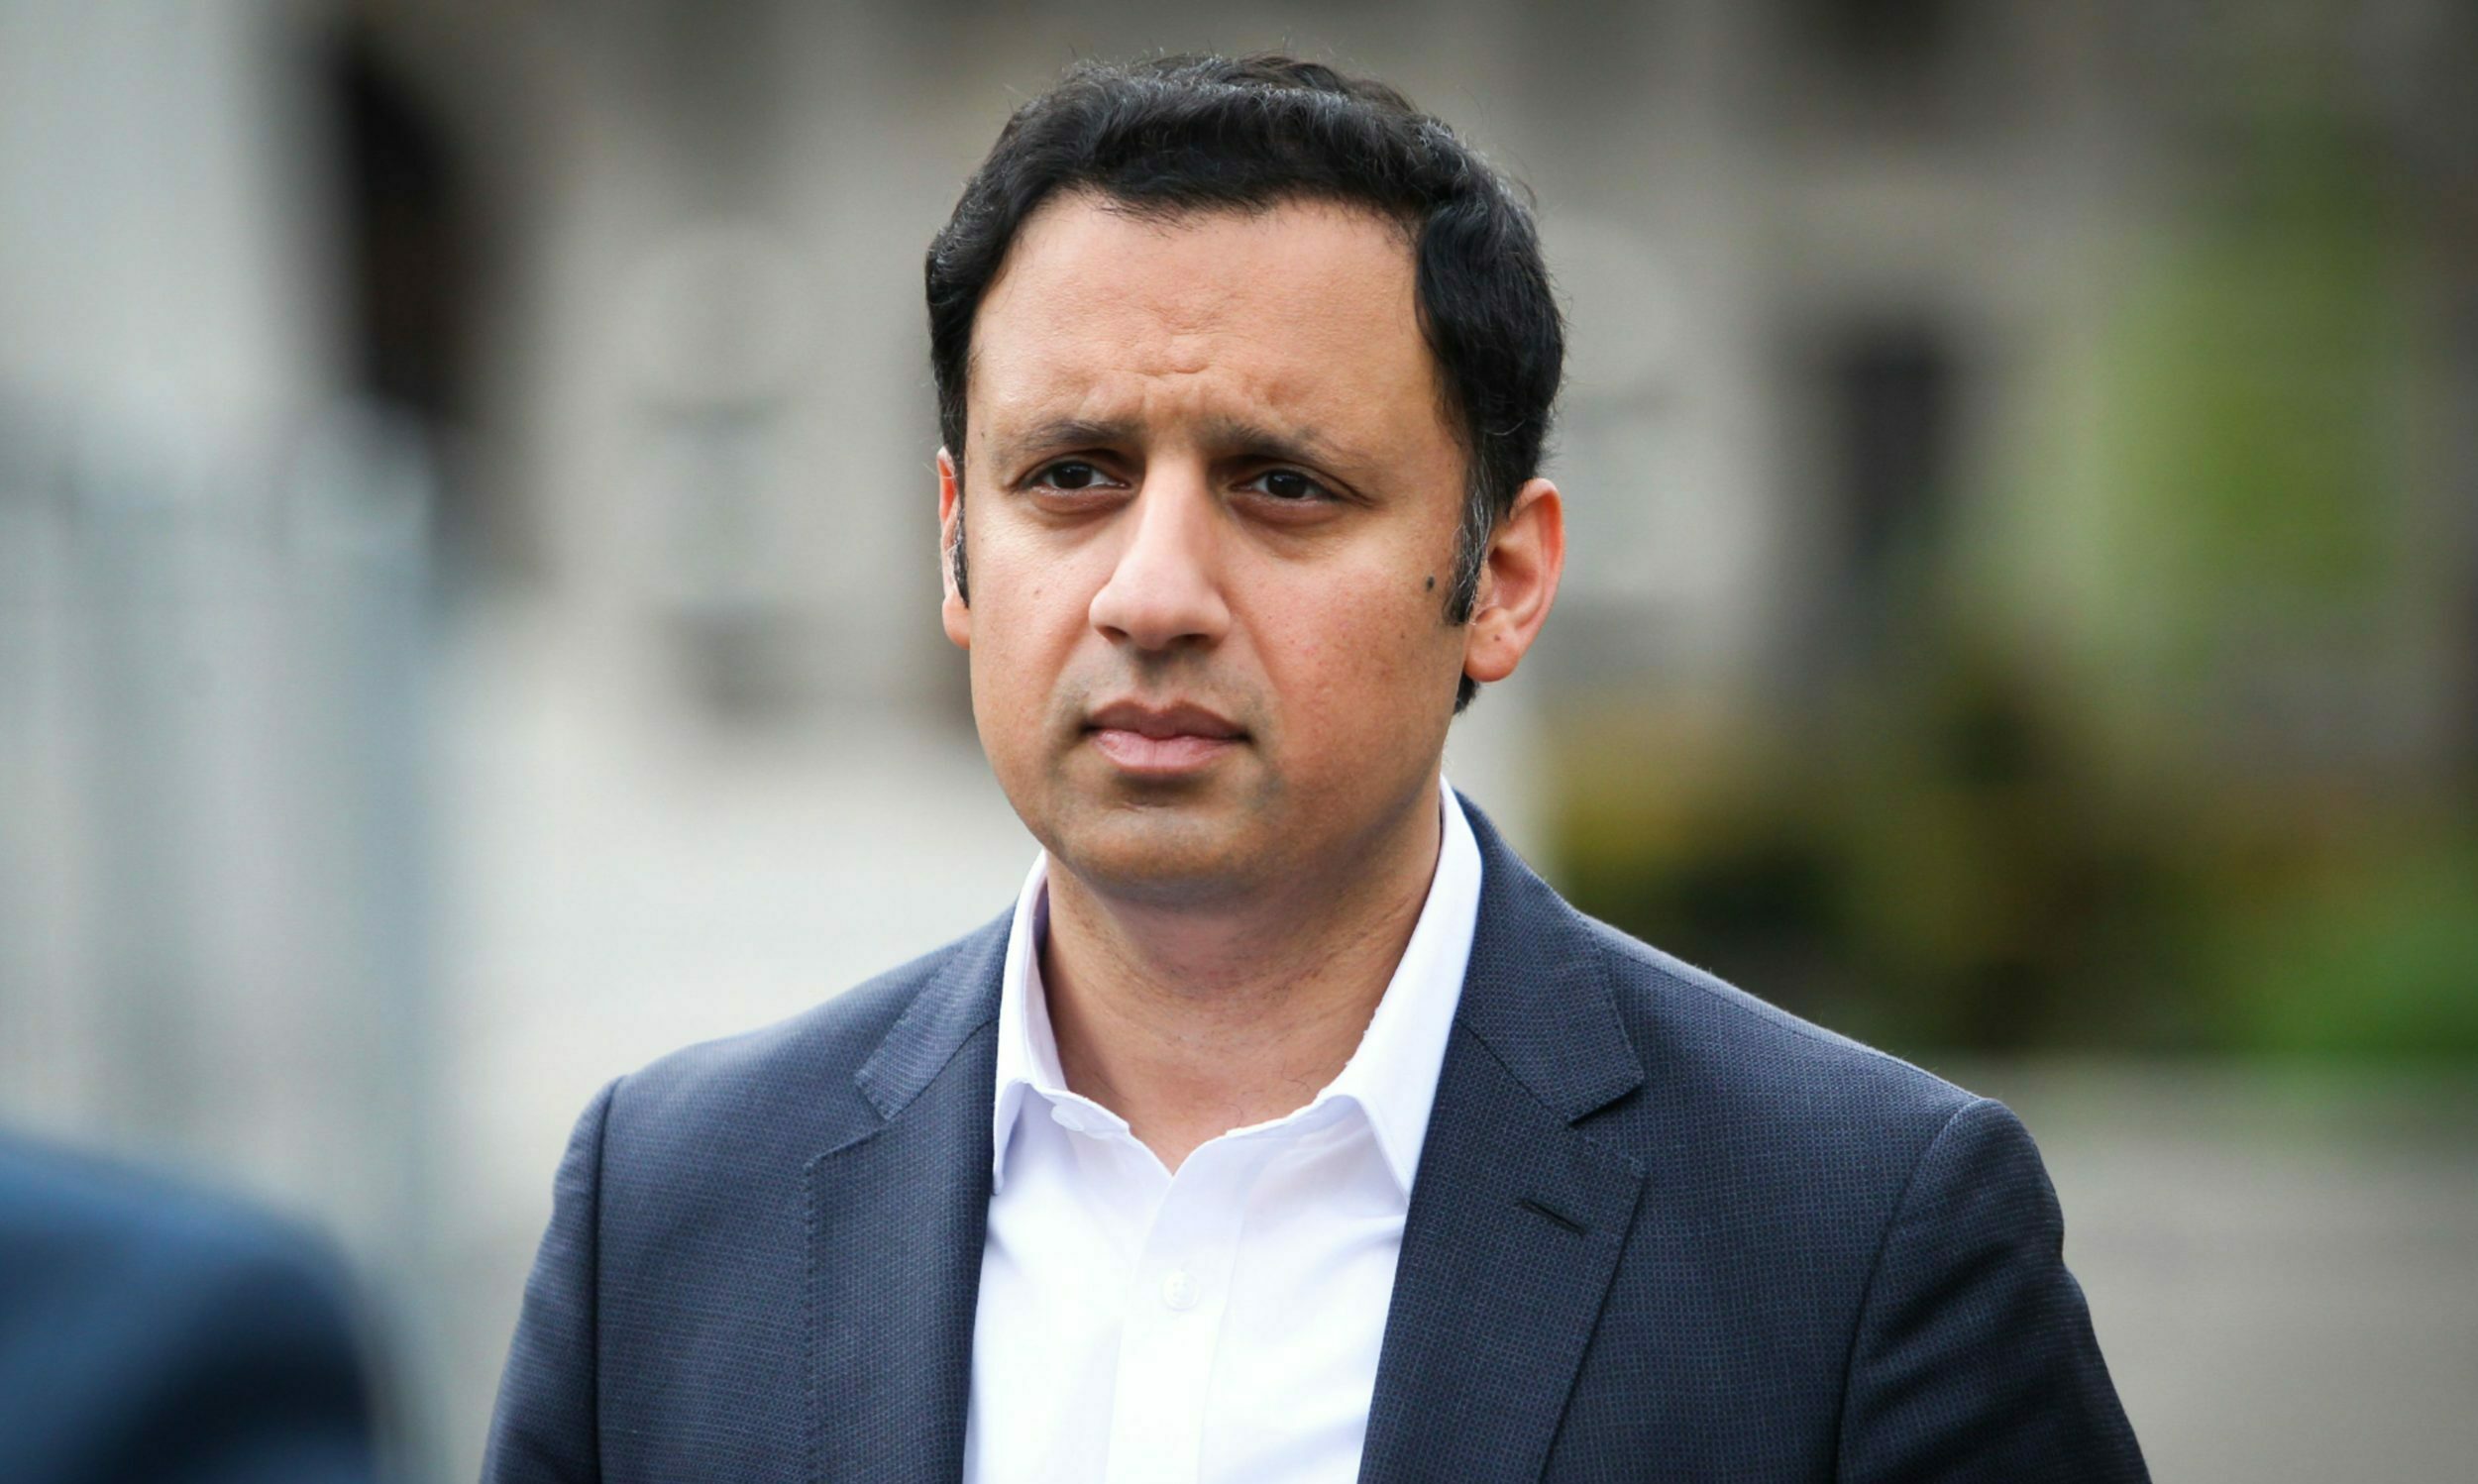 Labour leader Anas Sarwar could frame General Election as a point for change.